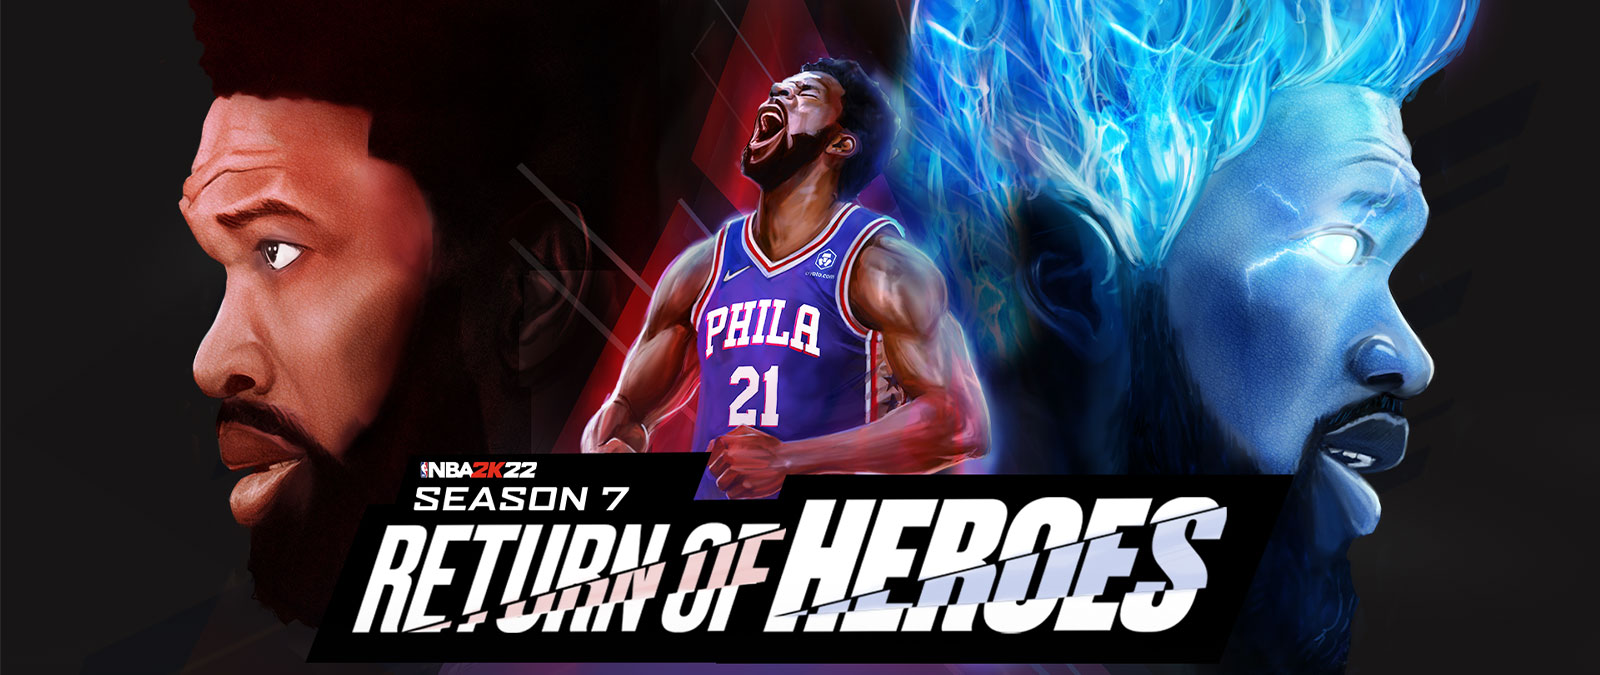 NBA 2K22, Season 7, Return of Heros, a player for Philadelphia yells into the sky and powers up with blue flames.